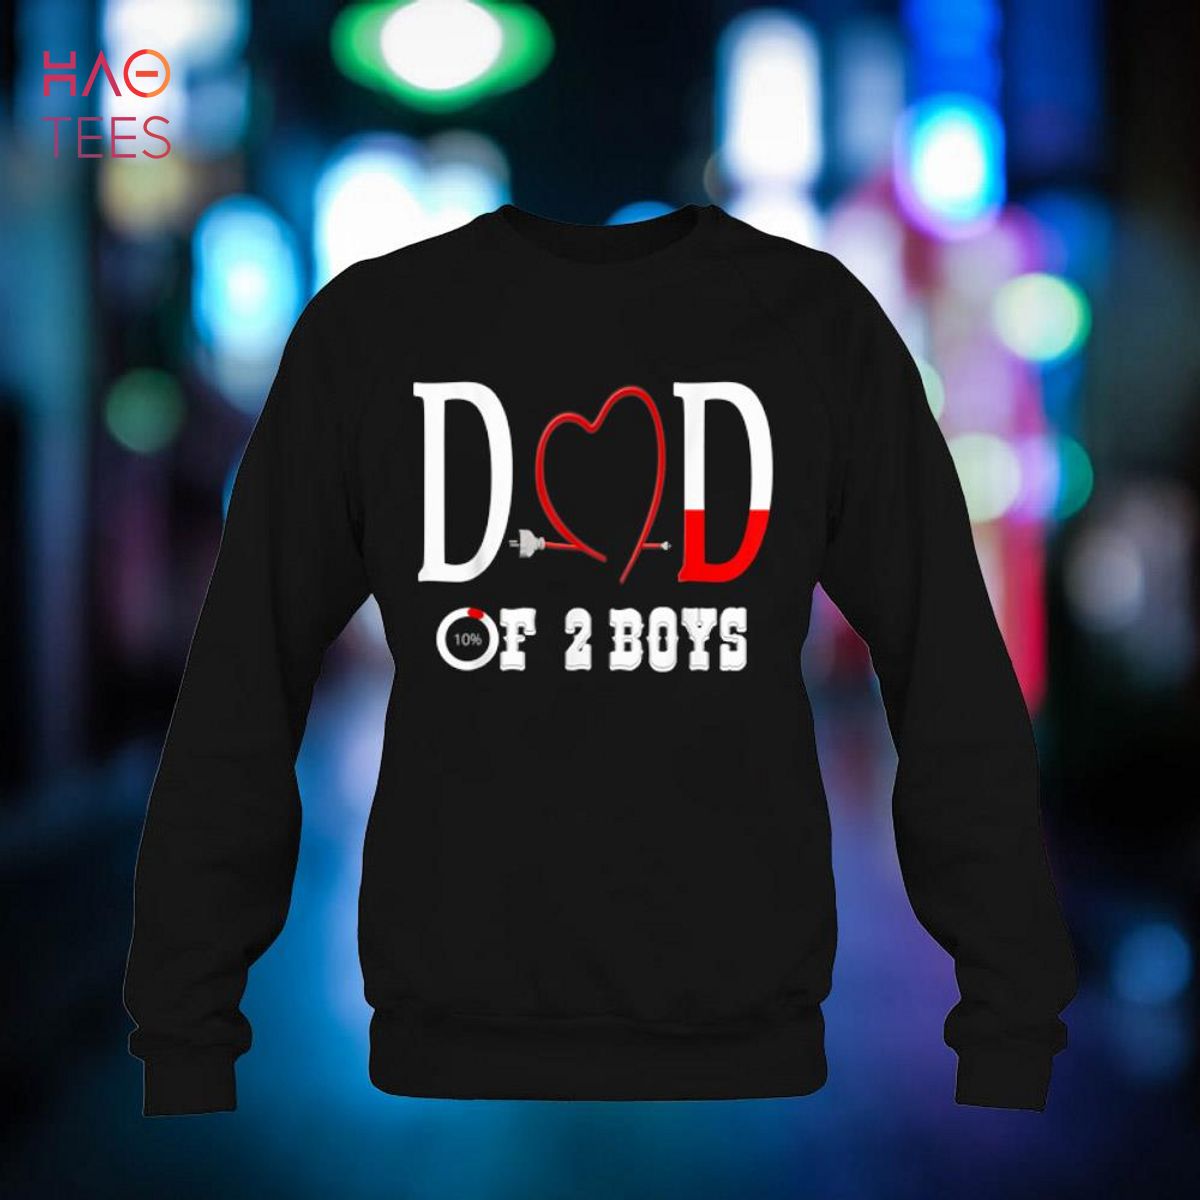 HOT TREND Mens DAD of 2 Boys, father or grandpa of 2 kids Shirt